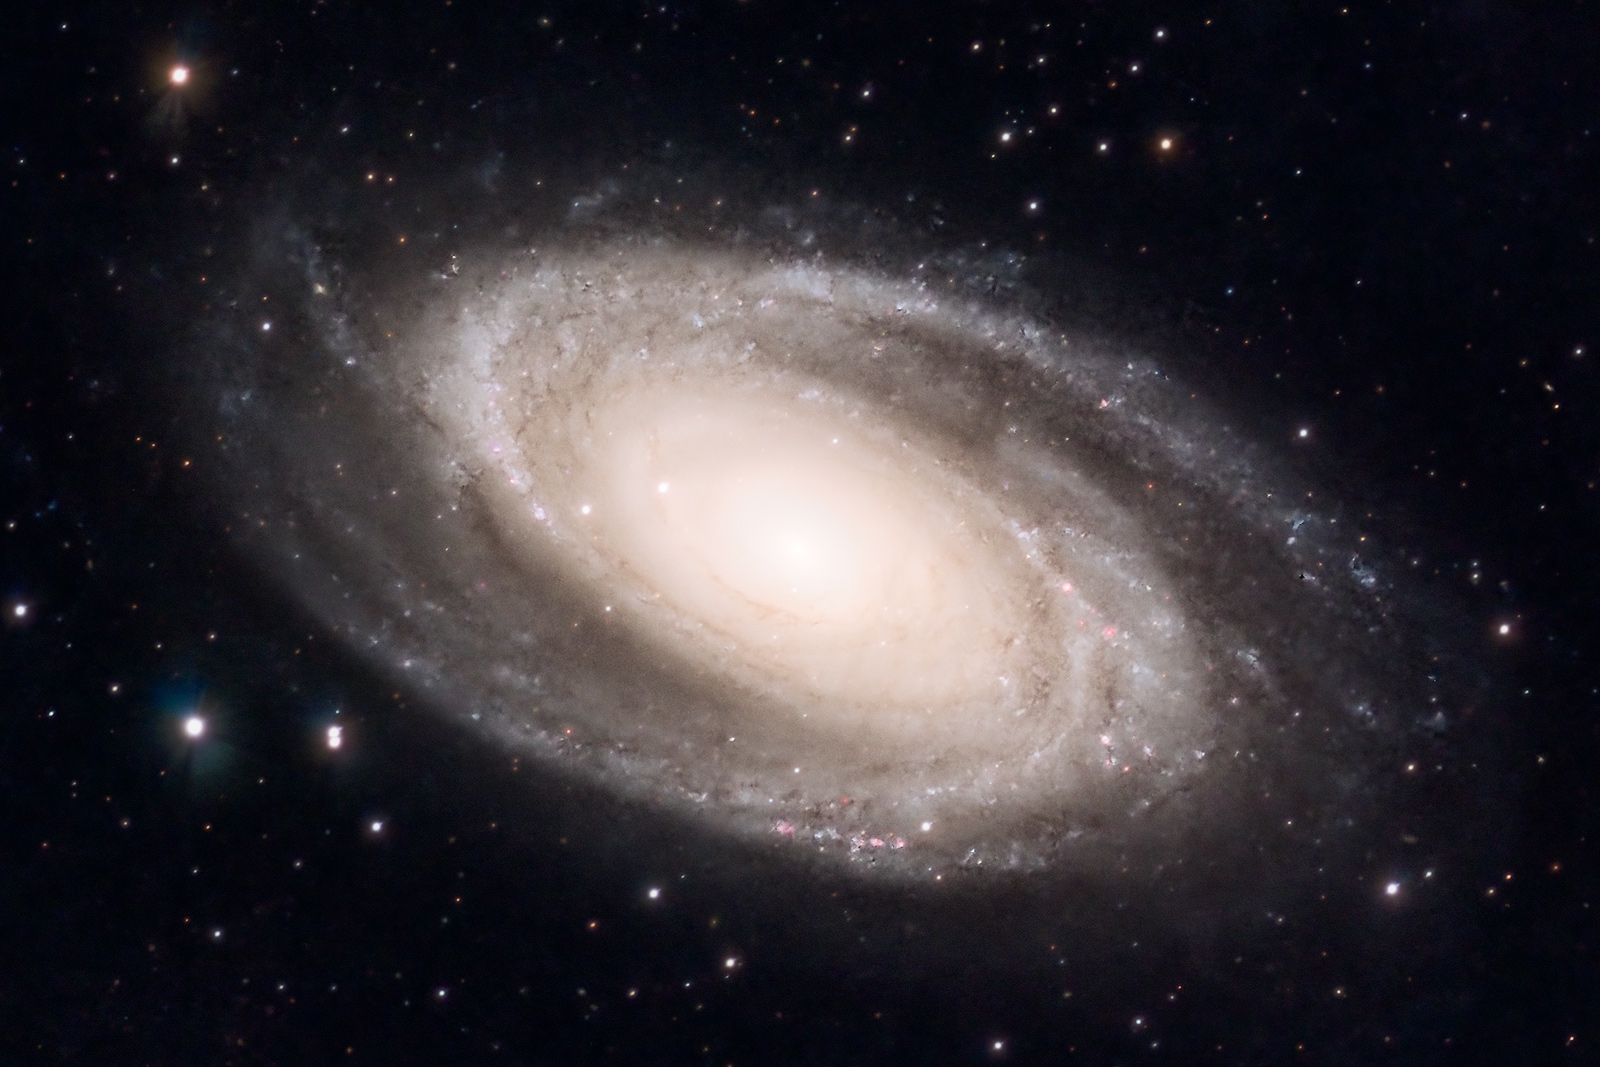 Bode's Galaxy, know as Messier 81 or simply M81, is a spiral galaxy located in the constellation Ursa Major and located about...